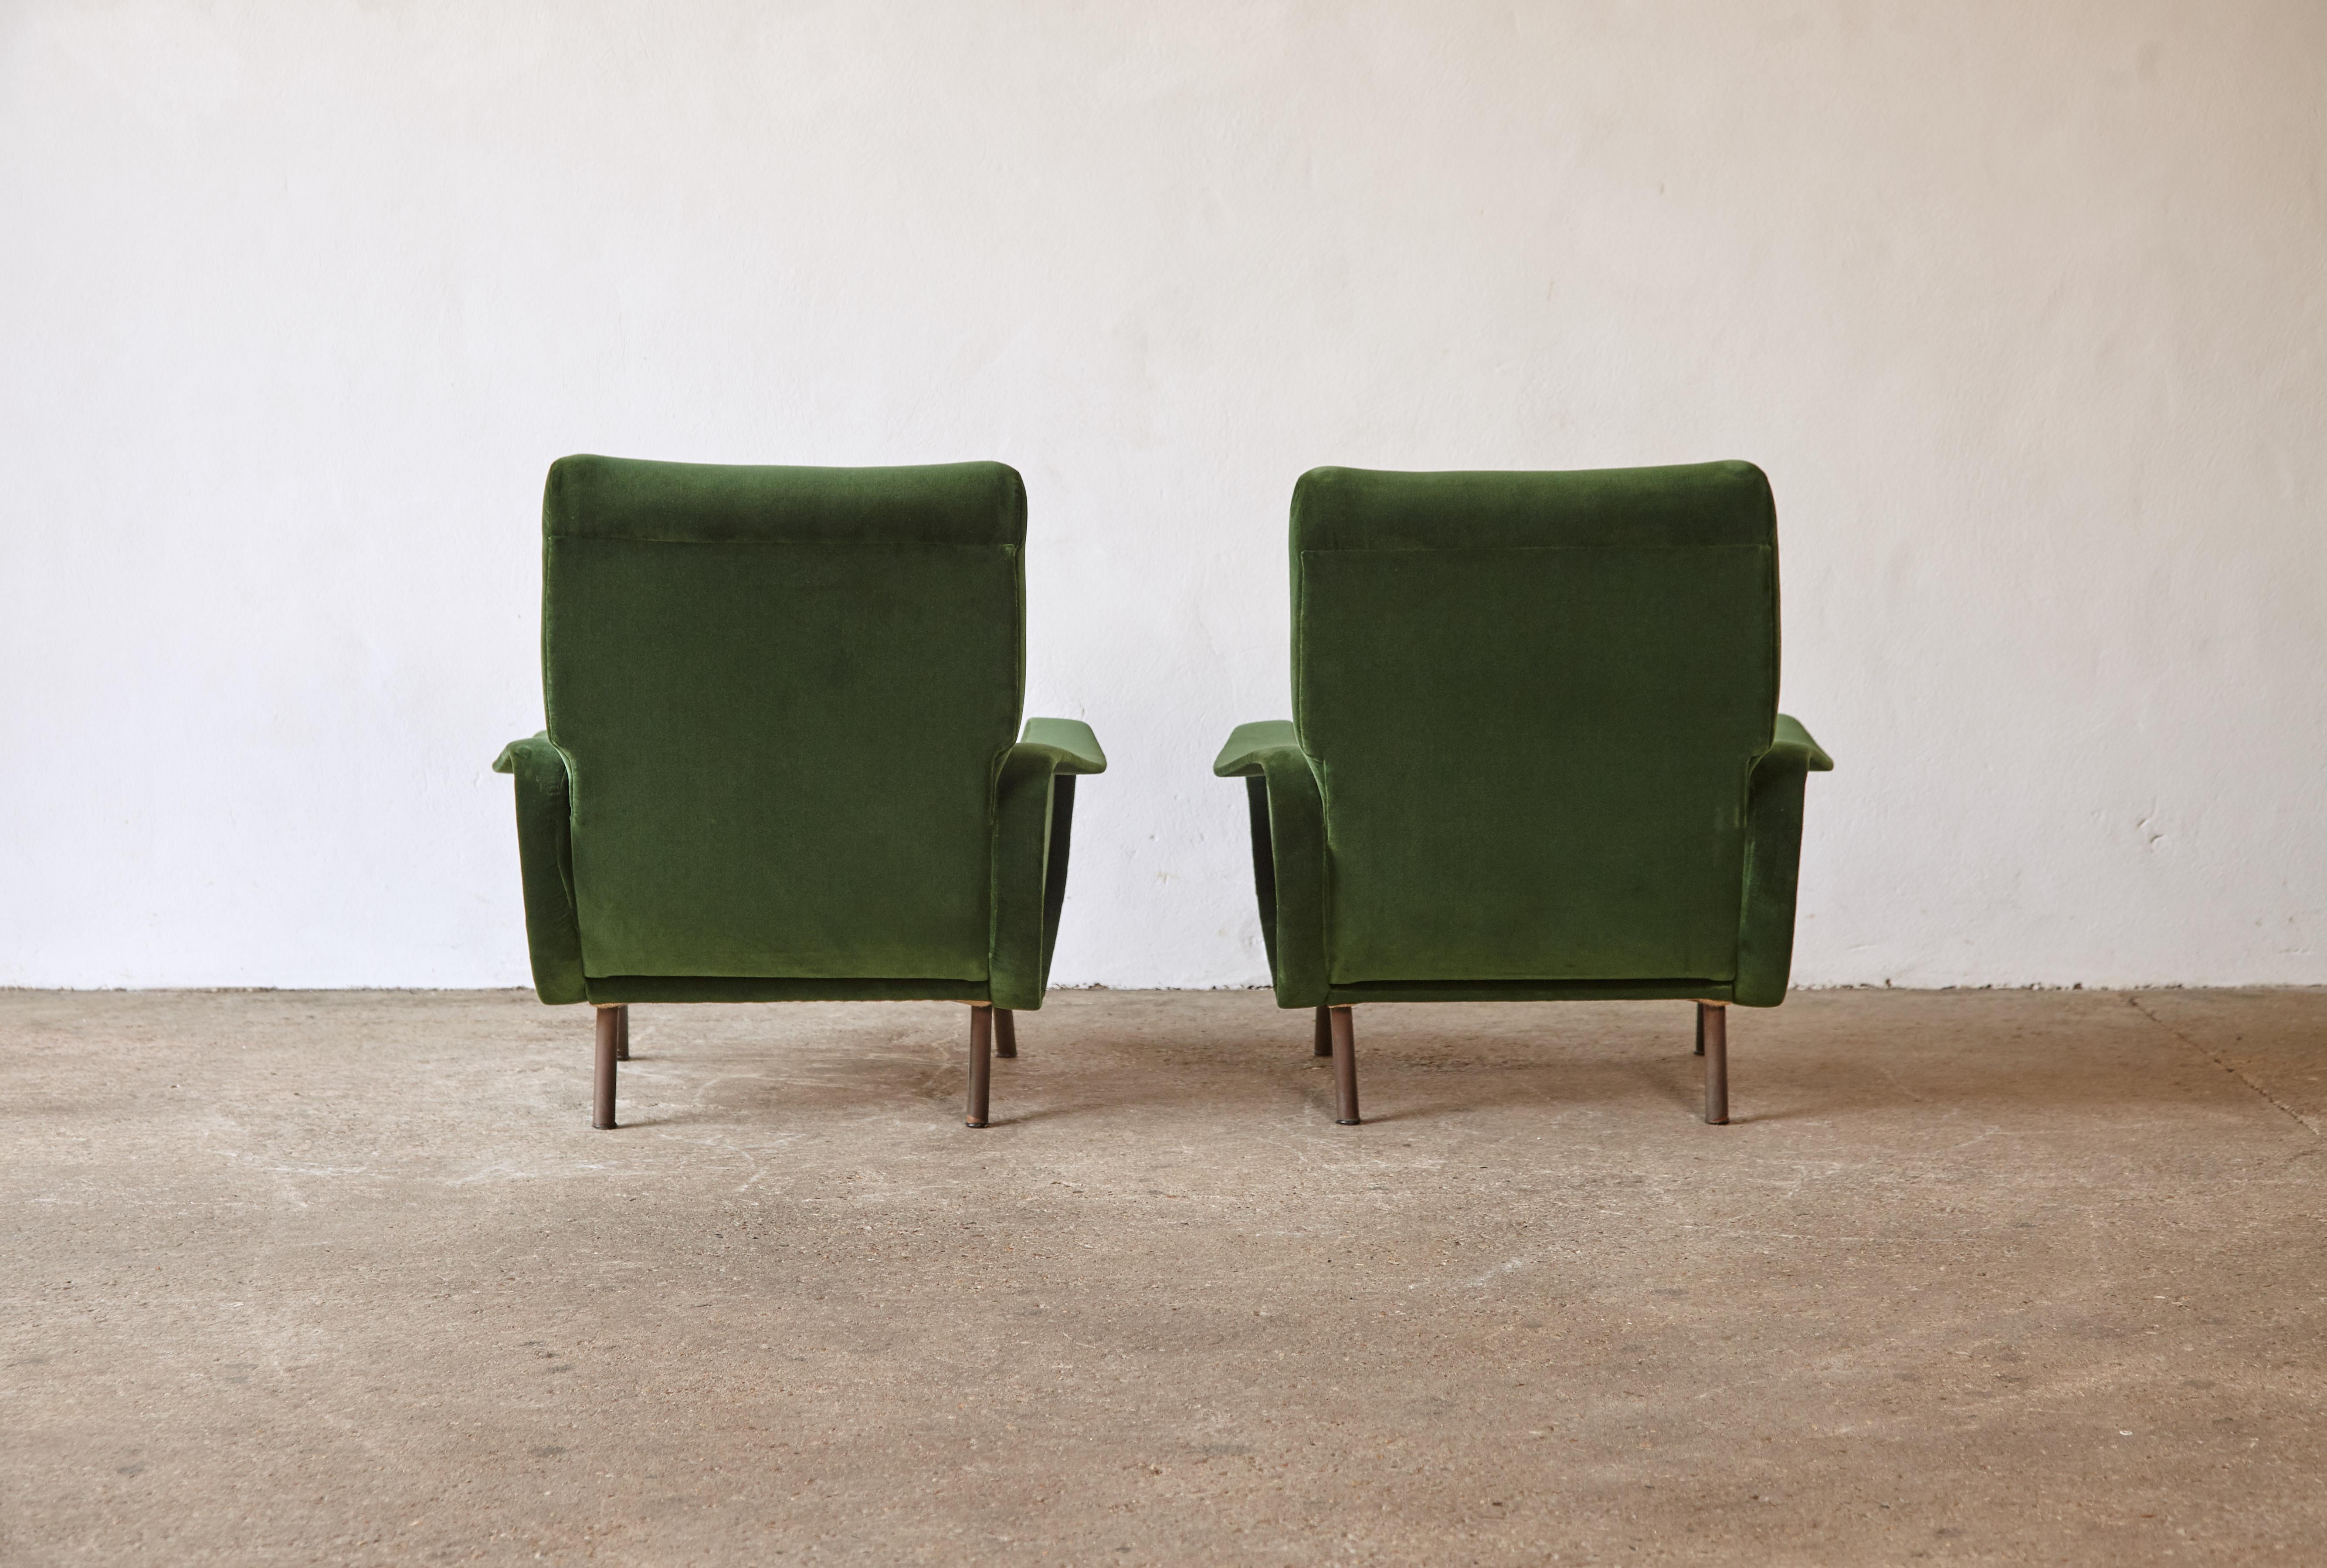 20th Century Authentic Marco Zanuso Lady Chairs, Arflex, Italy, 1950s, Newly Reupholstered